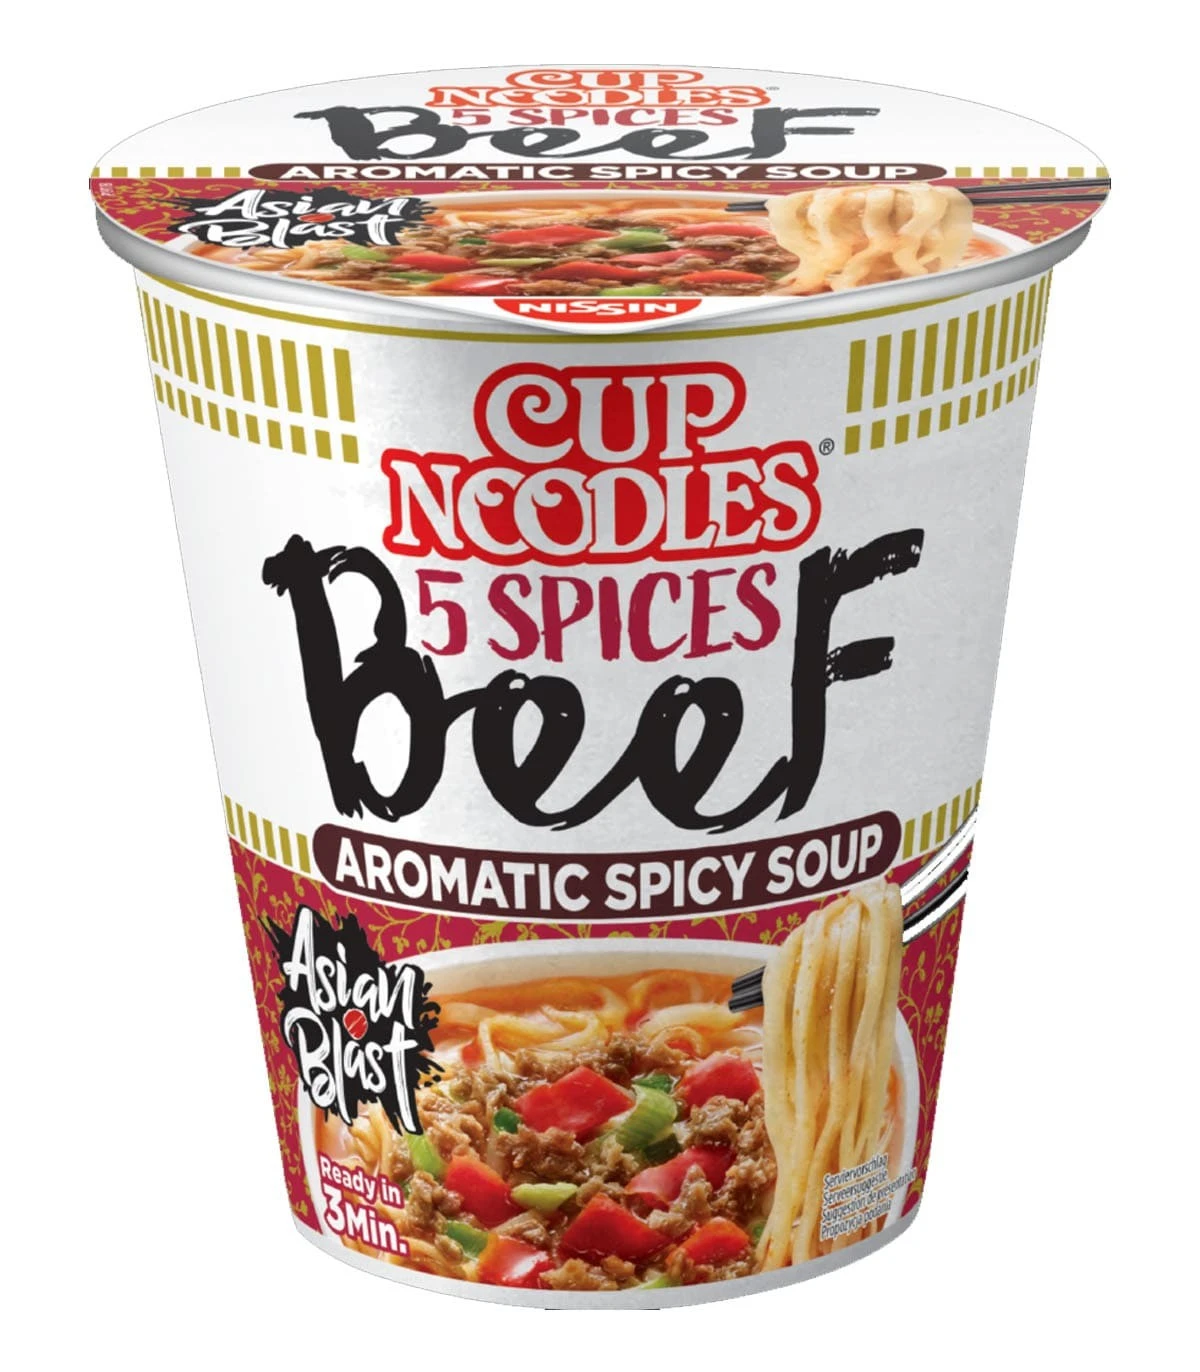 NISSIN CUP NOODLES 5 SPICES BEEF AROMATIC SPICY SOUP BLAST